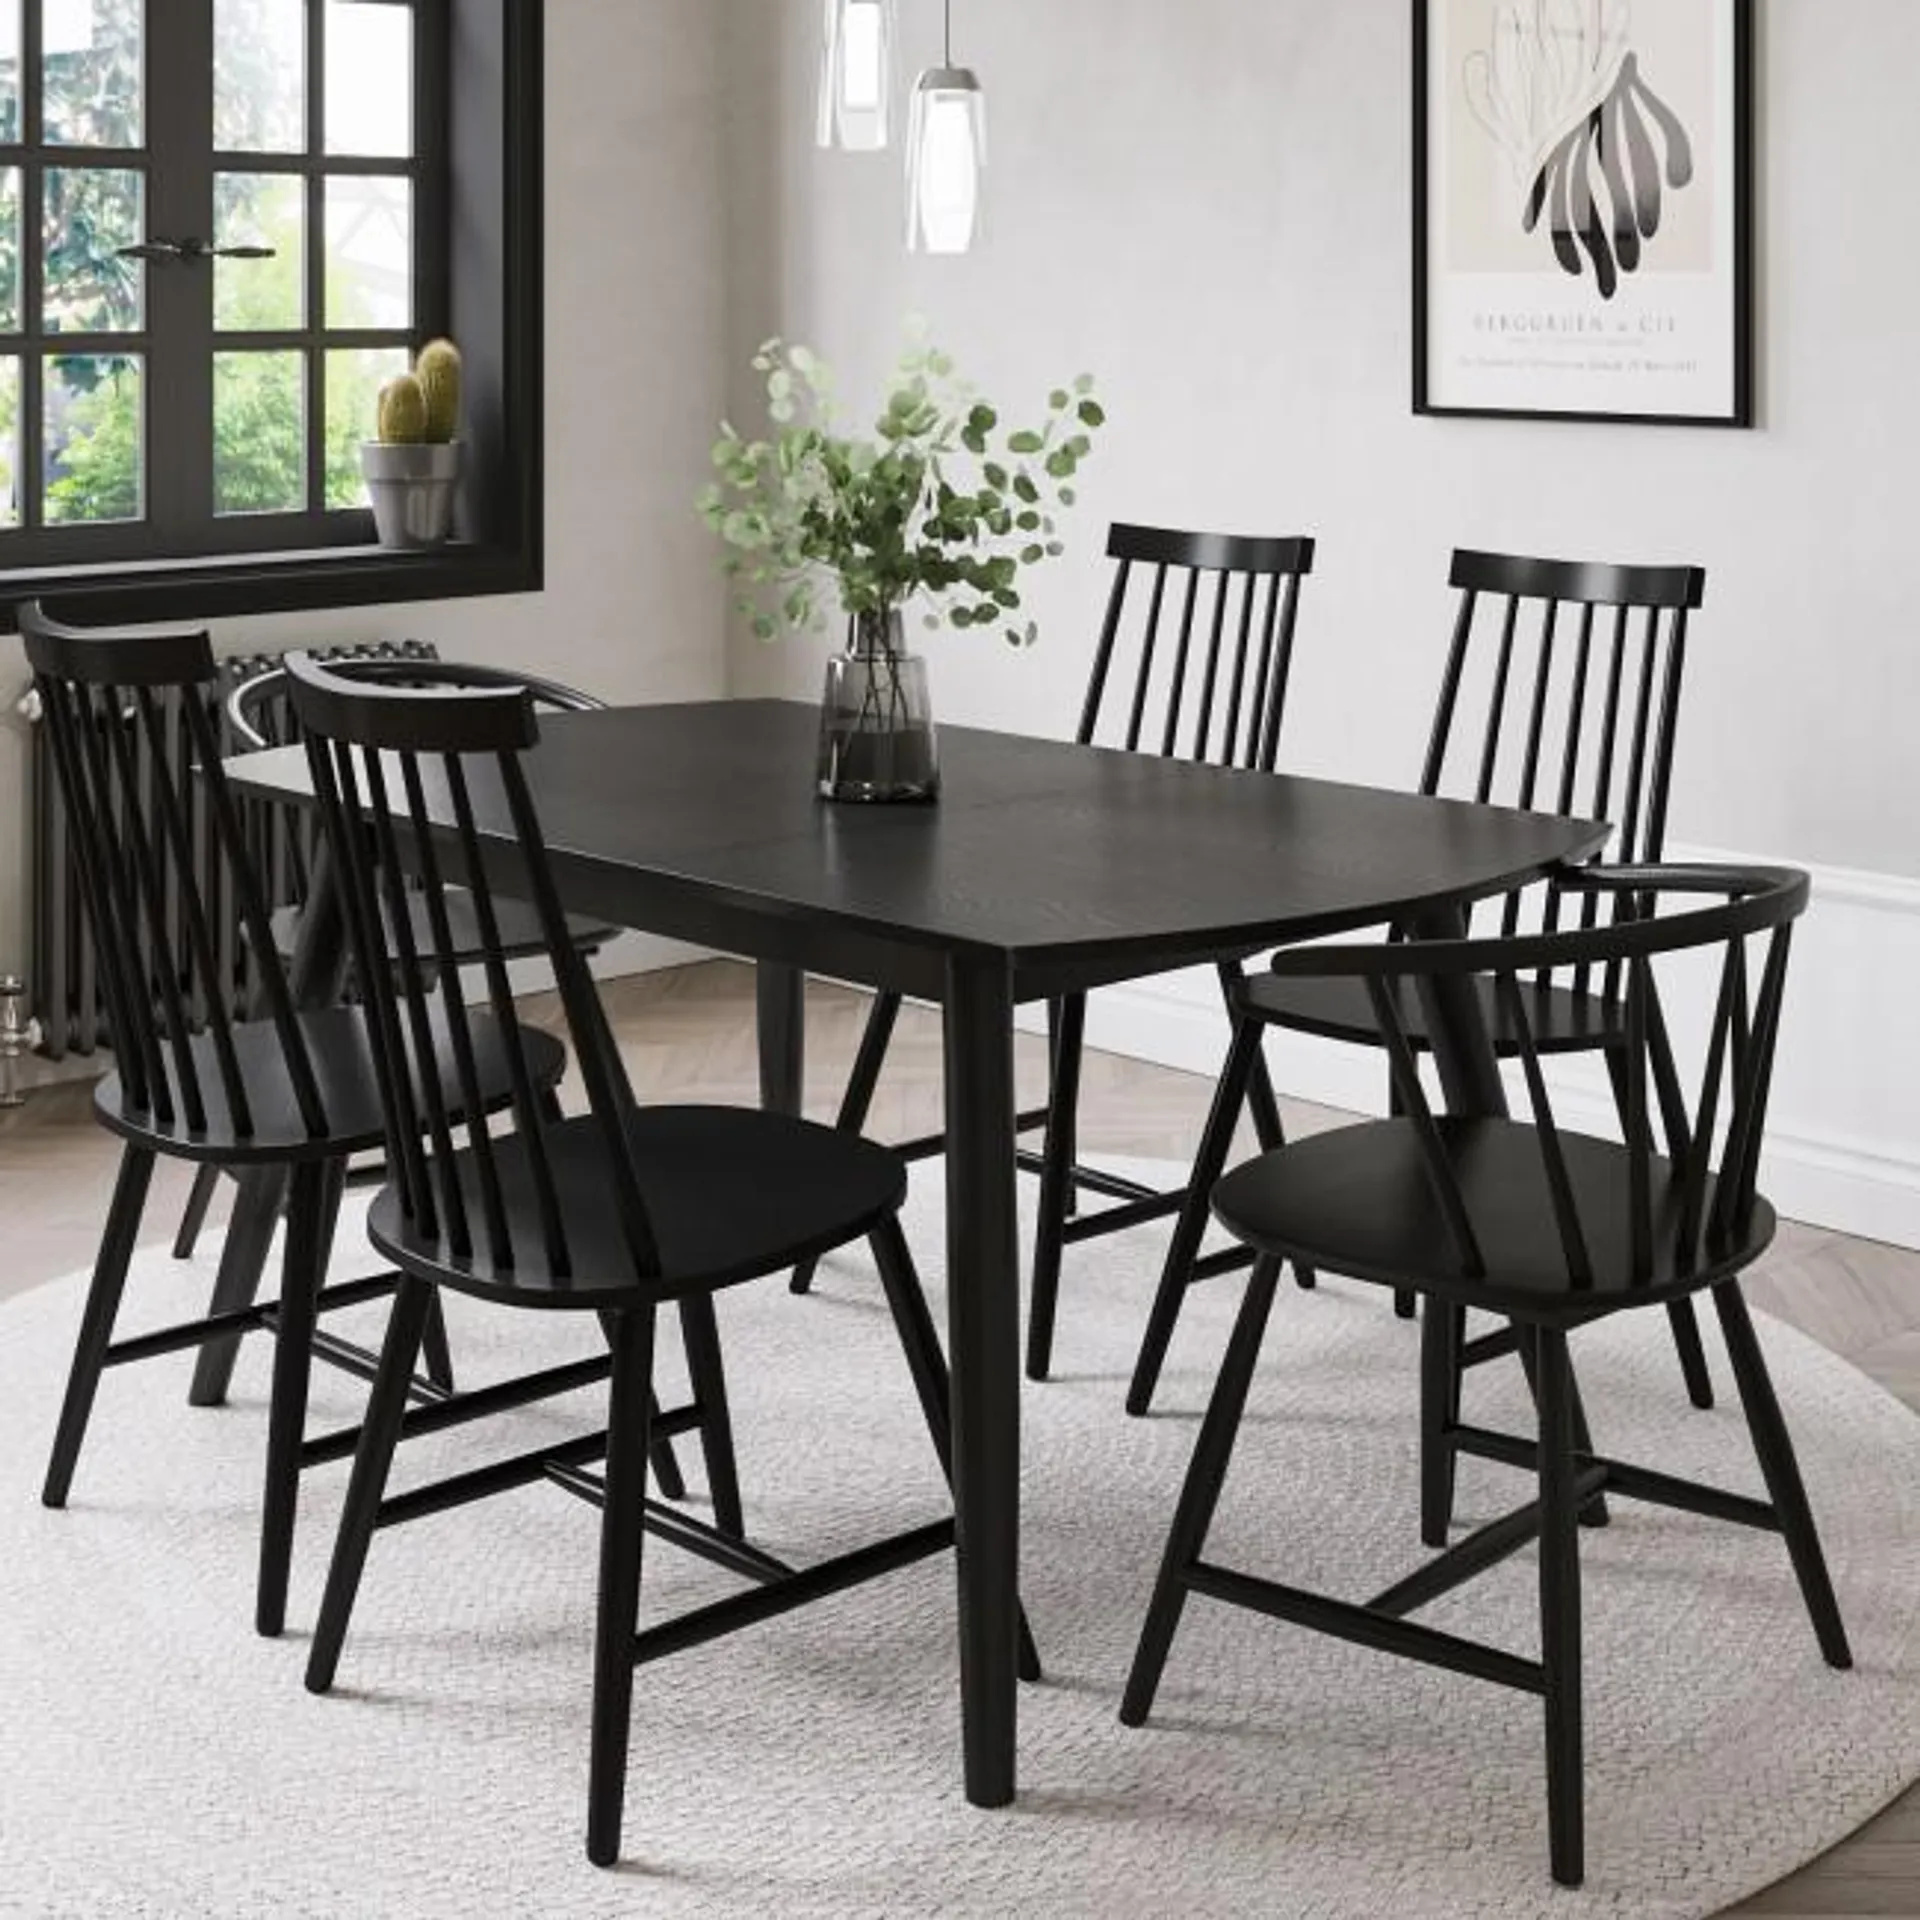 Black Wooden Extendable Dining Table with 4 Spindle Dining Chairs & 2 Curved Back Spindle Dining Chairs - Olsen